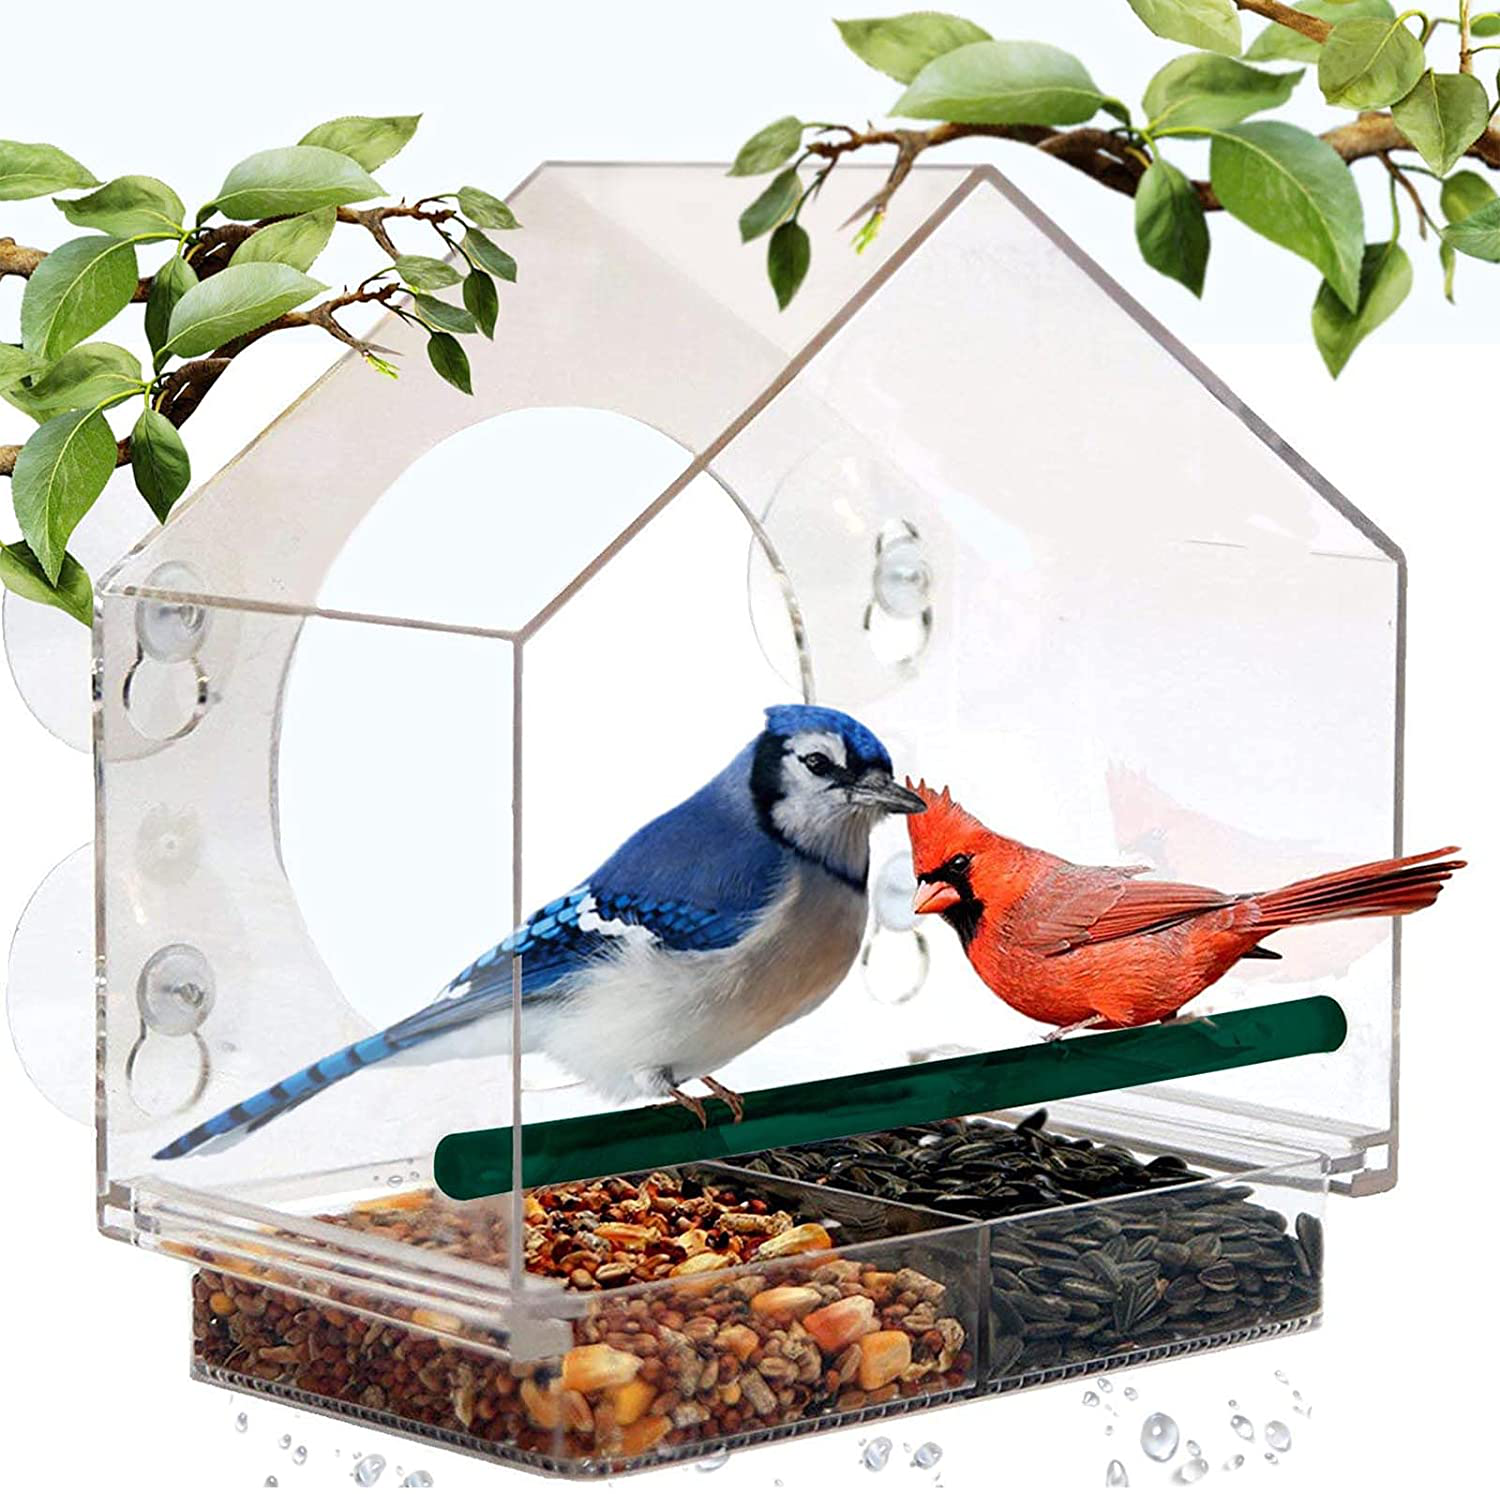 Mrcrafts Window Bird Feeder for outside with Strong Suction Cups, Fits for Cardinals, Finches, Chickadees Etc.